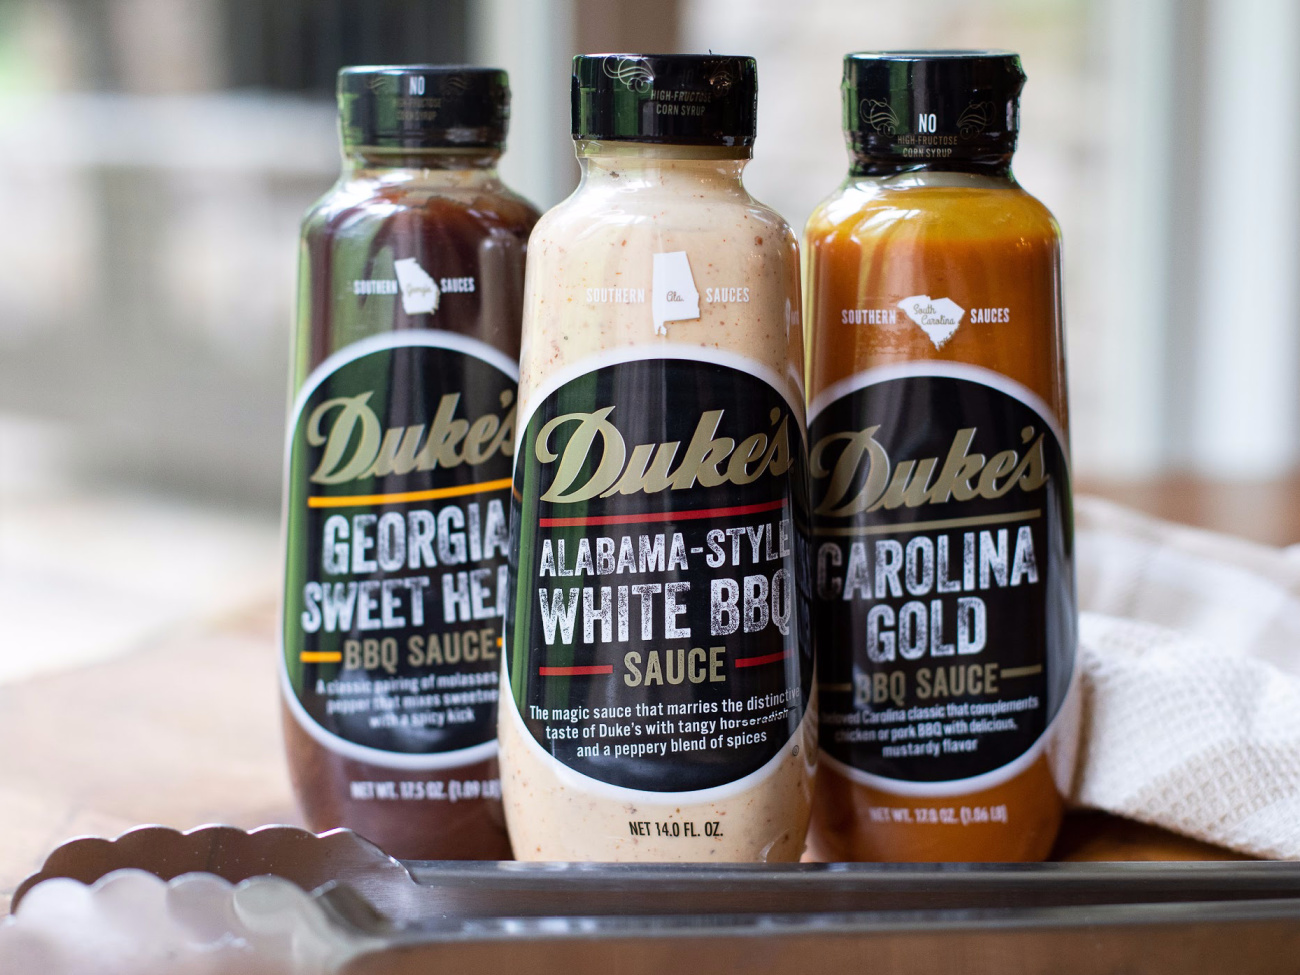 Add Great Flavor To Your BBQ With Duke's New Southern Sauces - Buy One, Get One FREE At Publix! on I Heart Publix